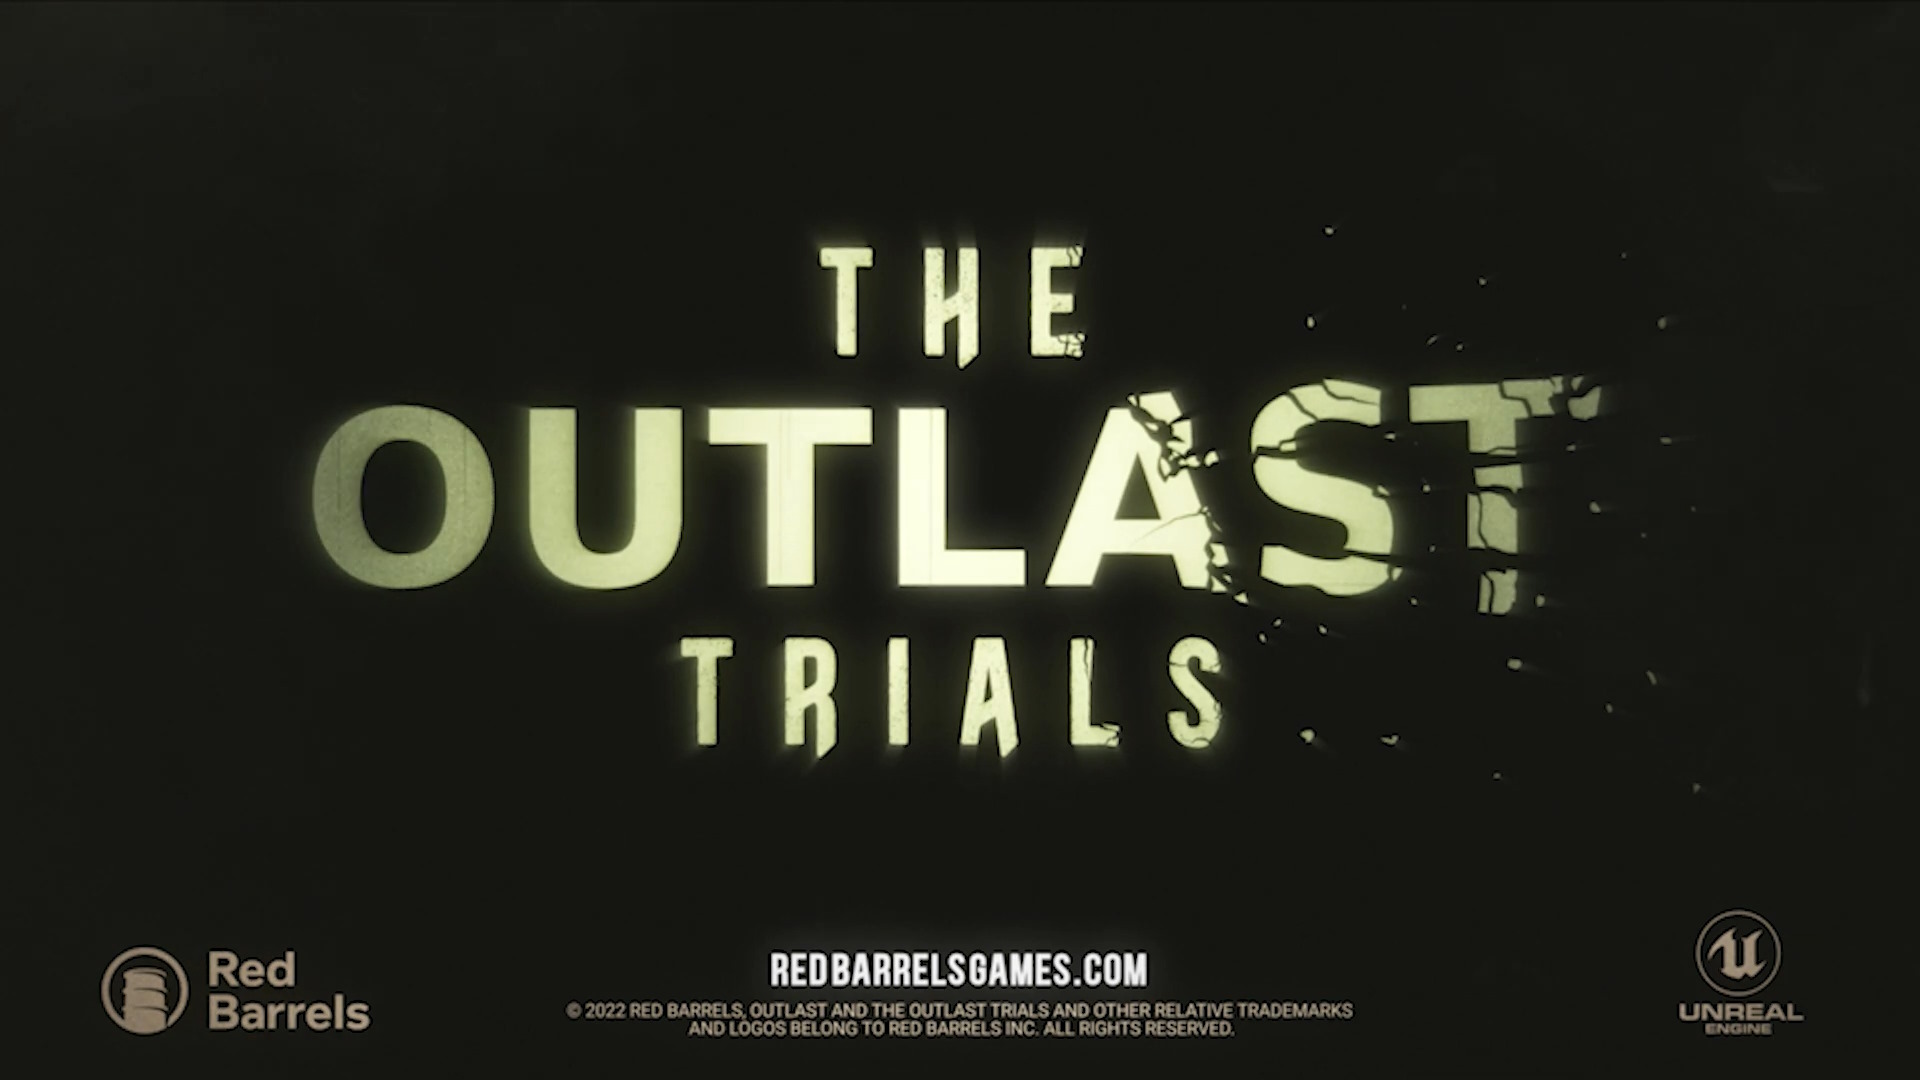 The game process has crashed ue4 opp outlast trials фото 31